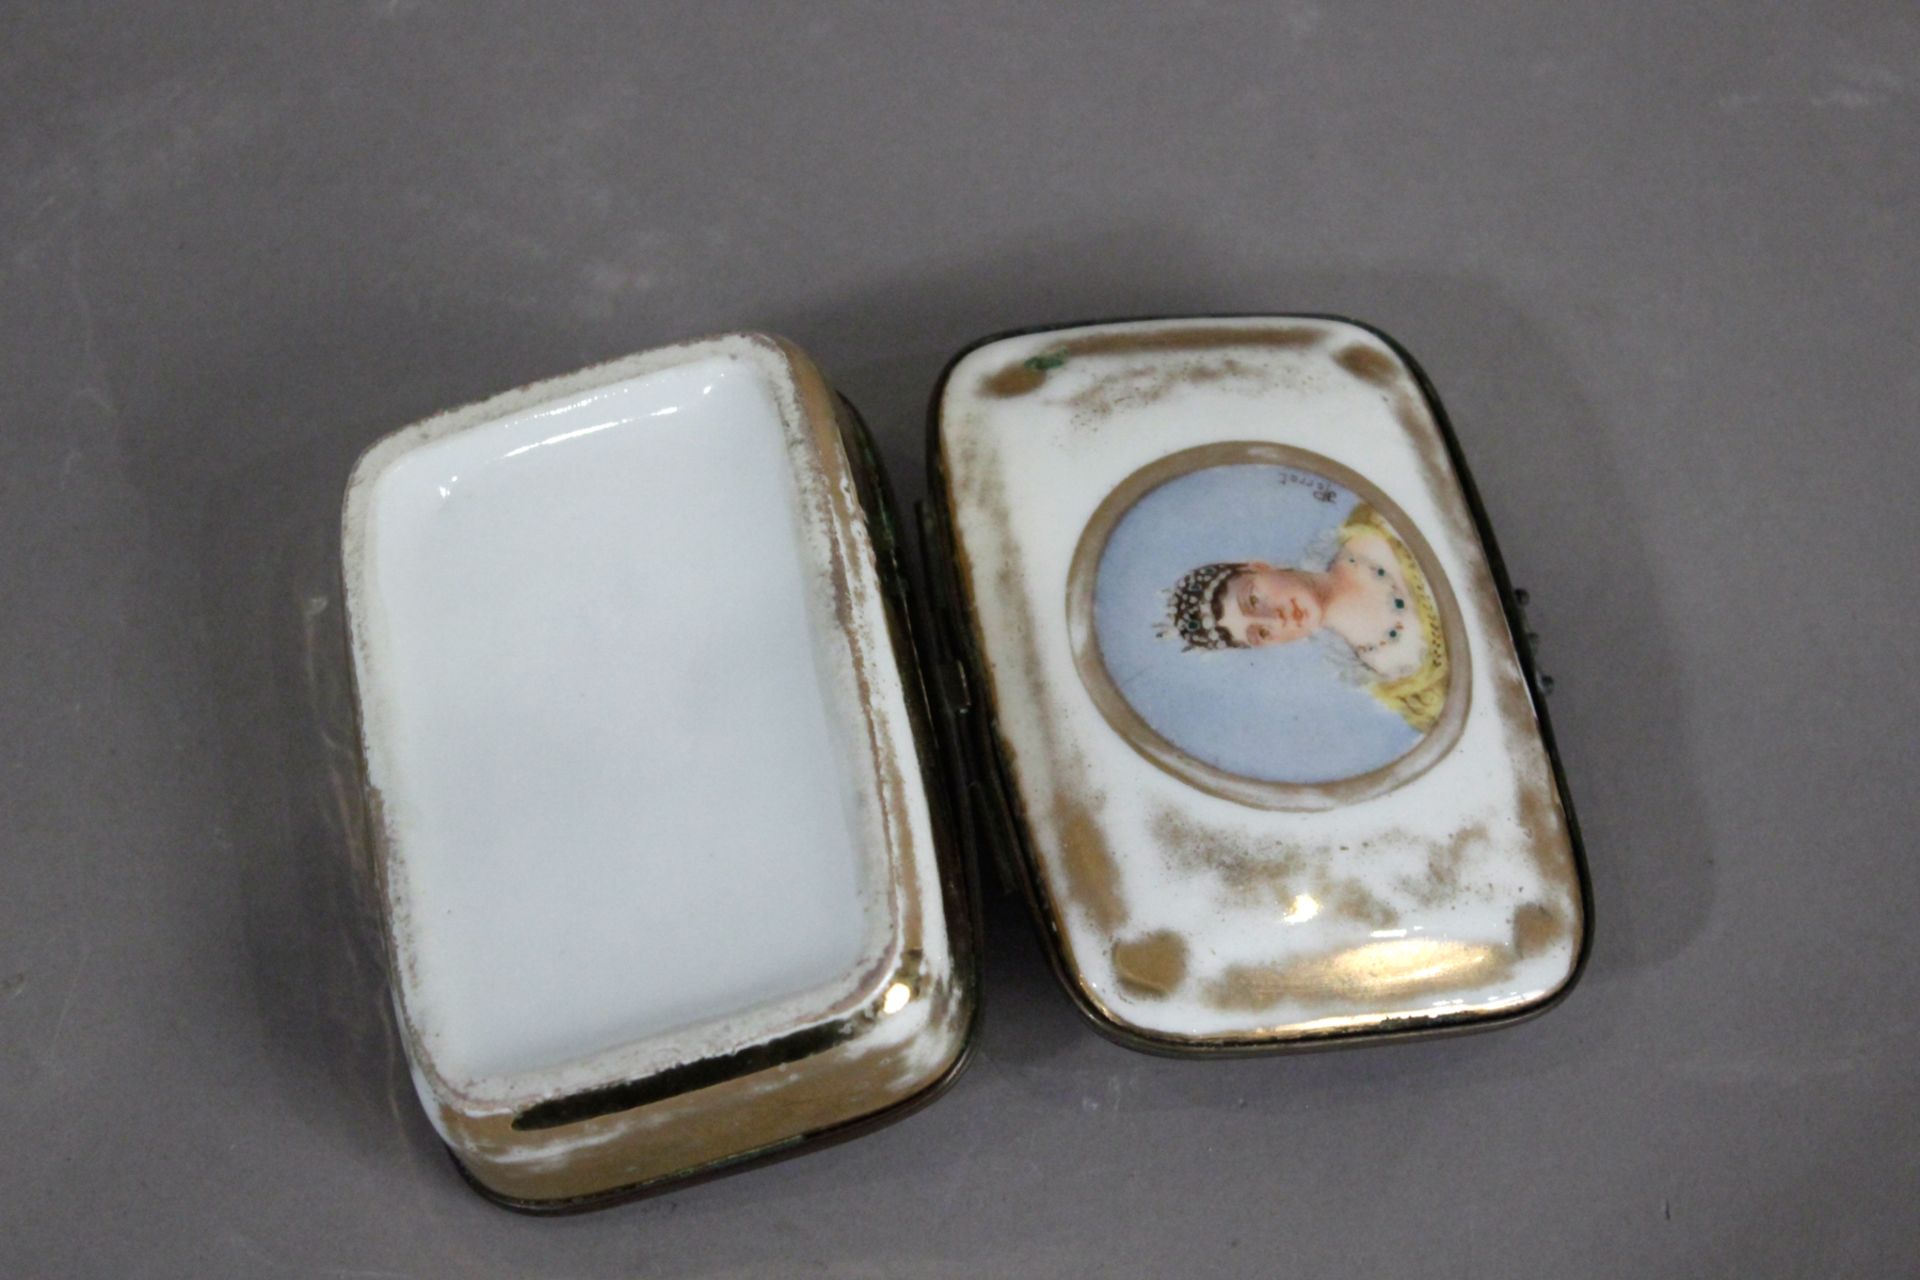 A 19th century French box in Old Paris porcelain - Image 3 of 4